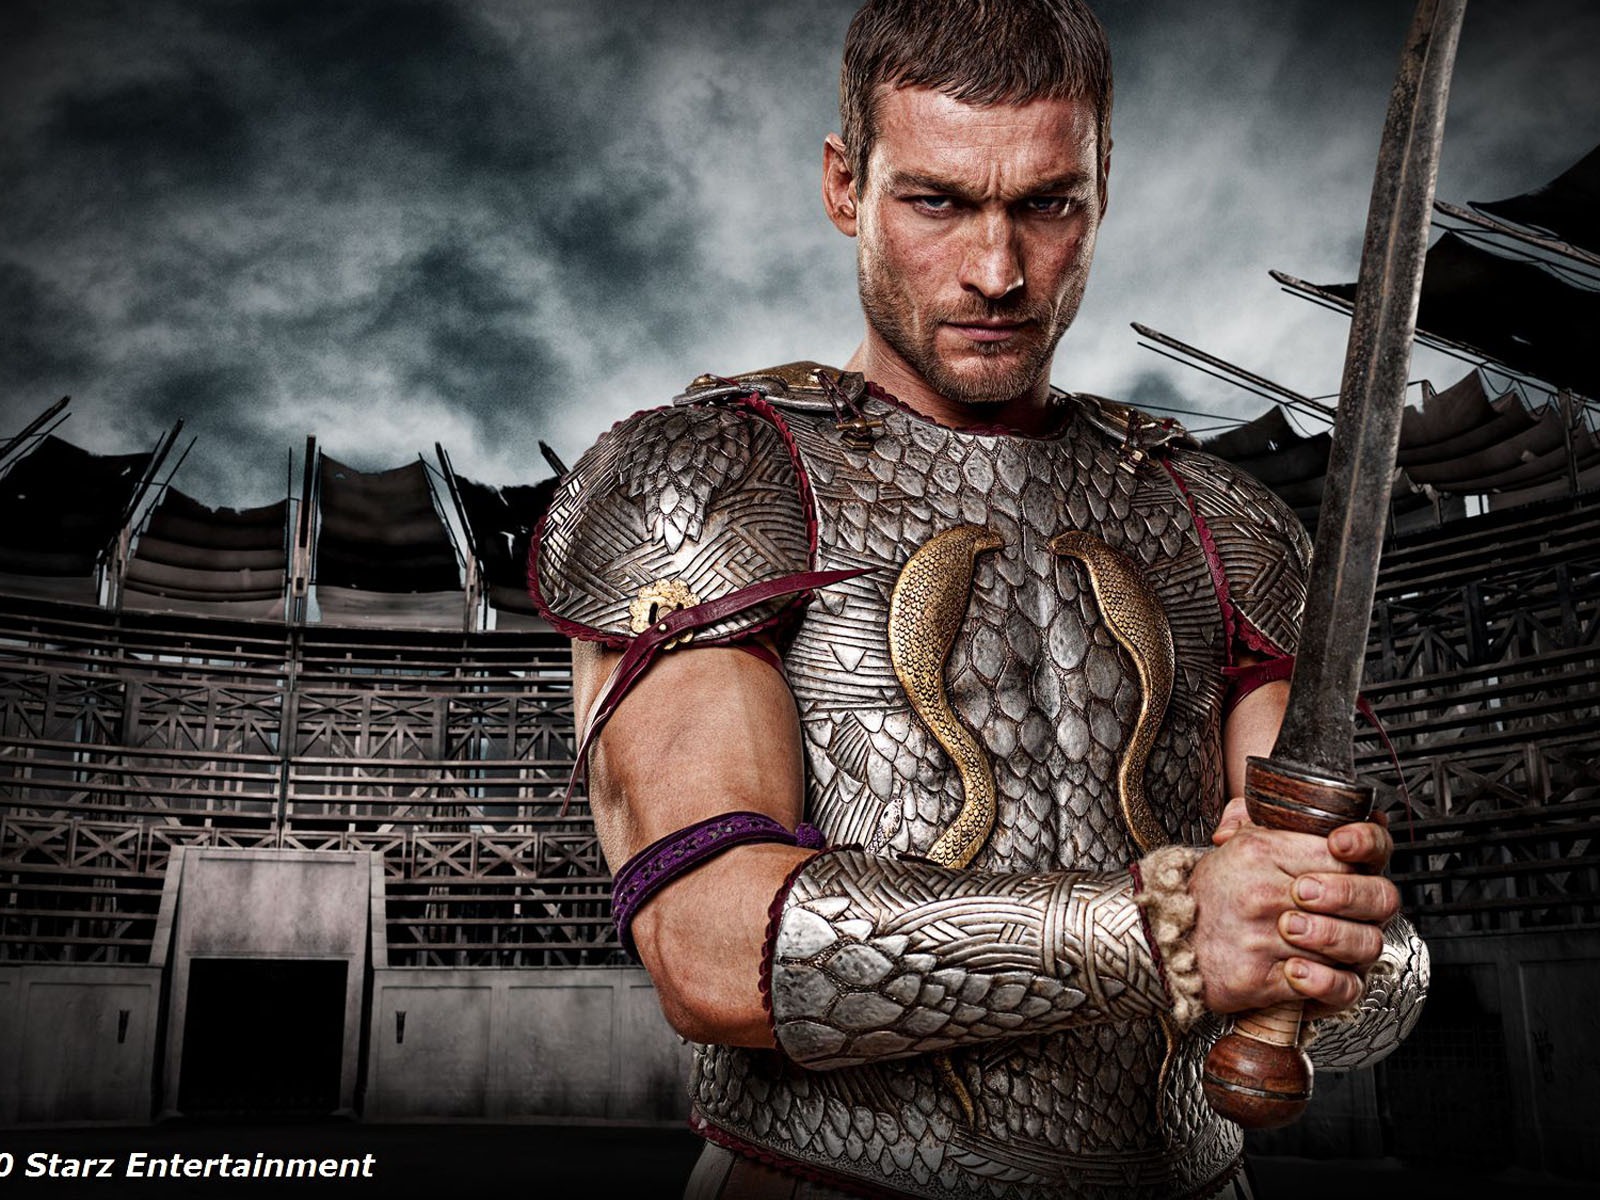 Spartacus: Blood and Sand HD Wallpaper #3 - 1600x1200